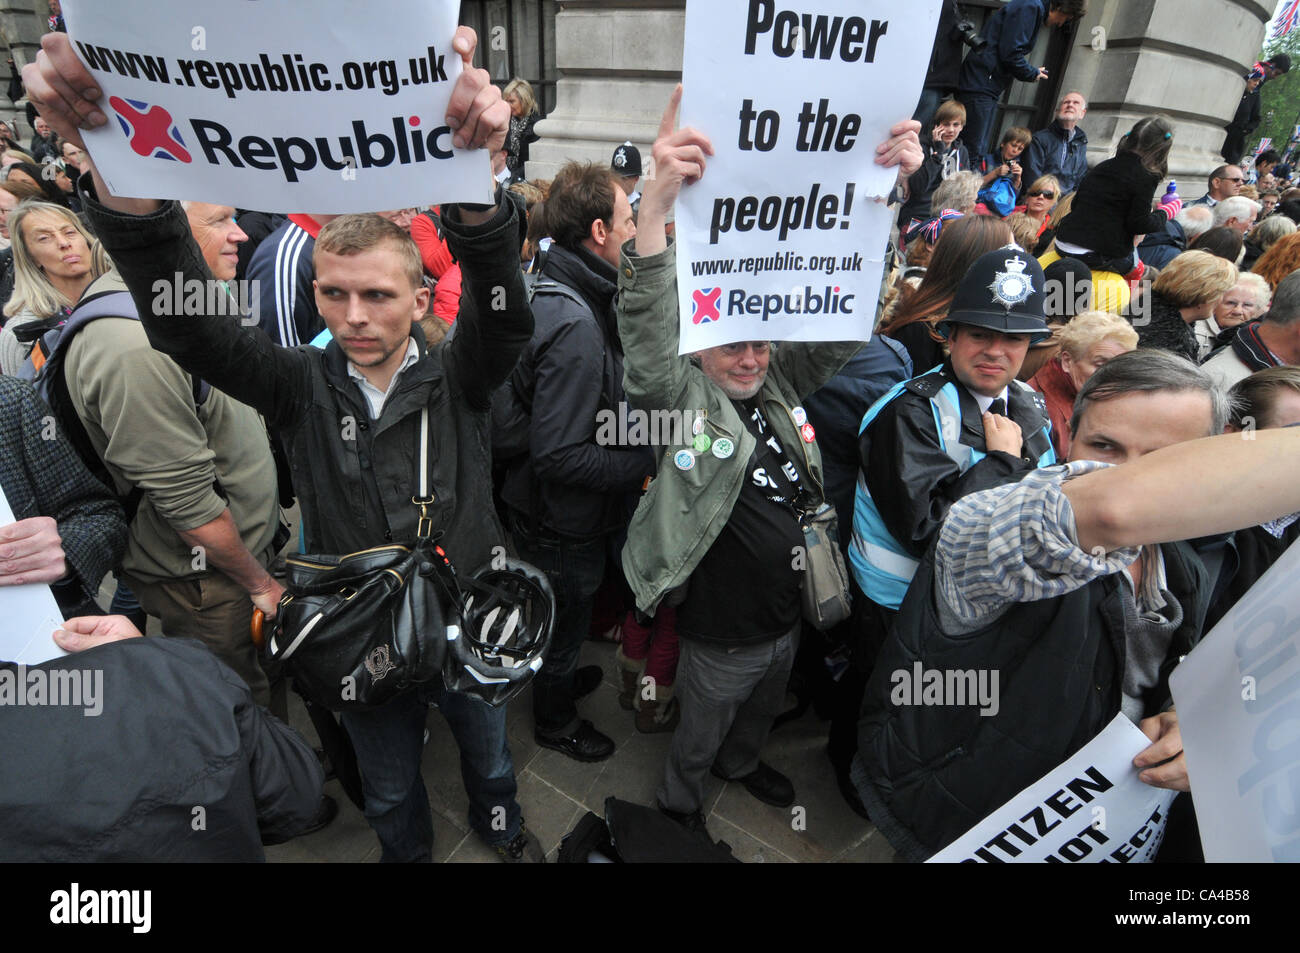 Whitehall, London, UK. 5th June 2012. Republic protesters hold banners amongst the dense crowds of people waiting to catch a glimpse of the Queen. Stock Photo